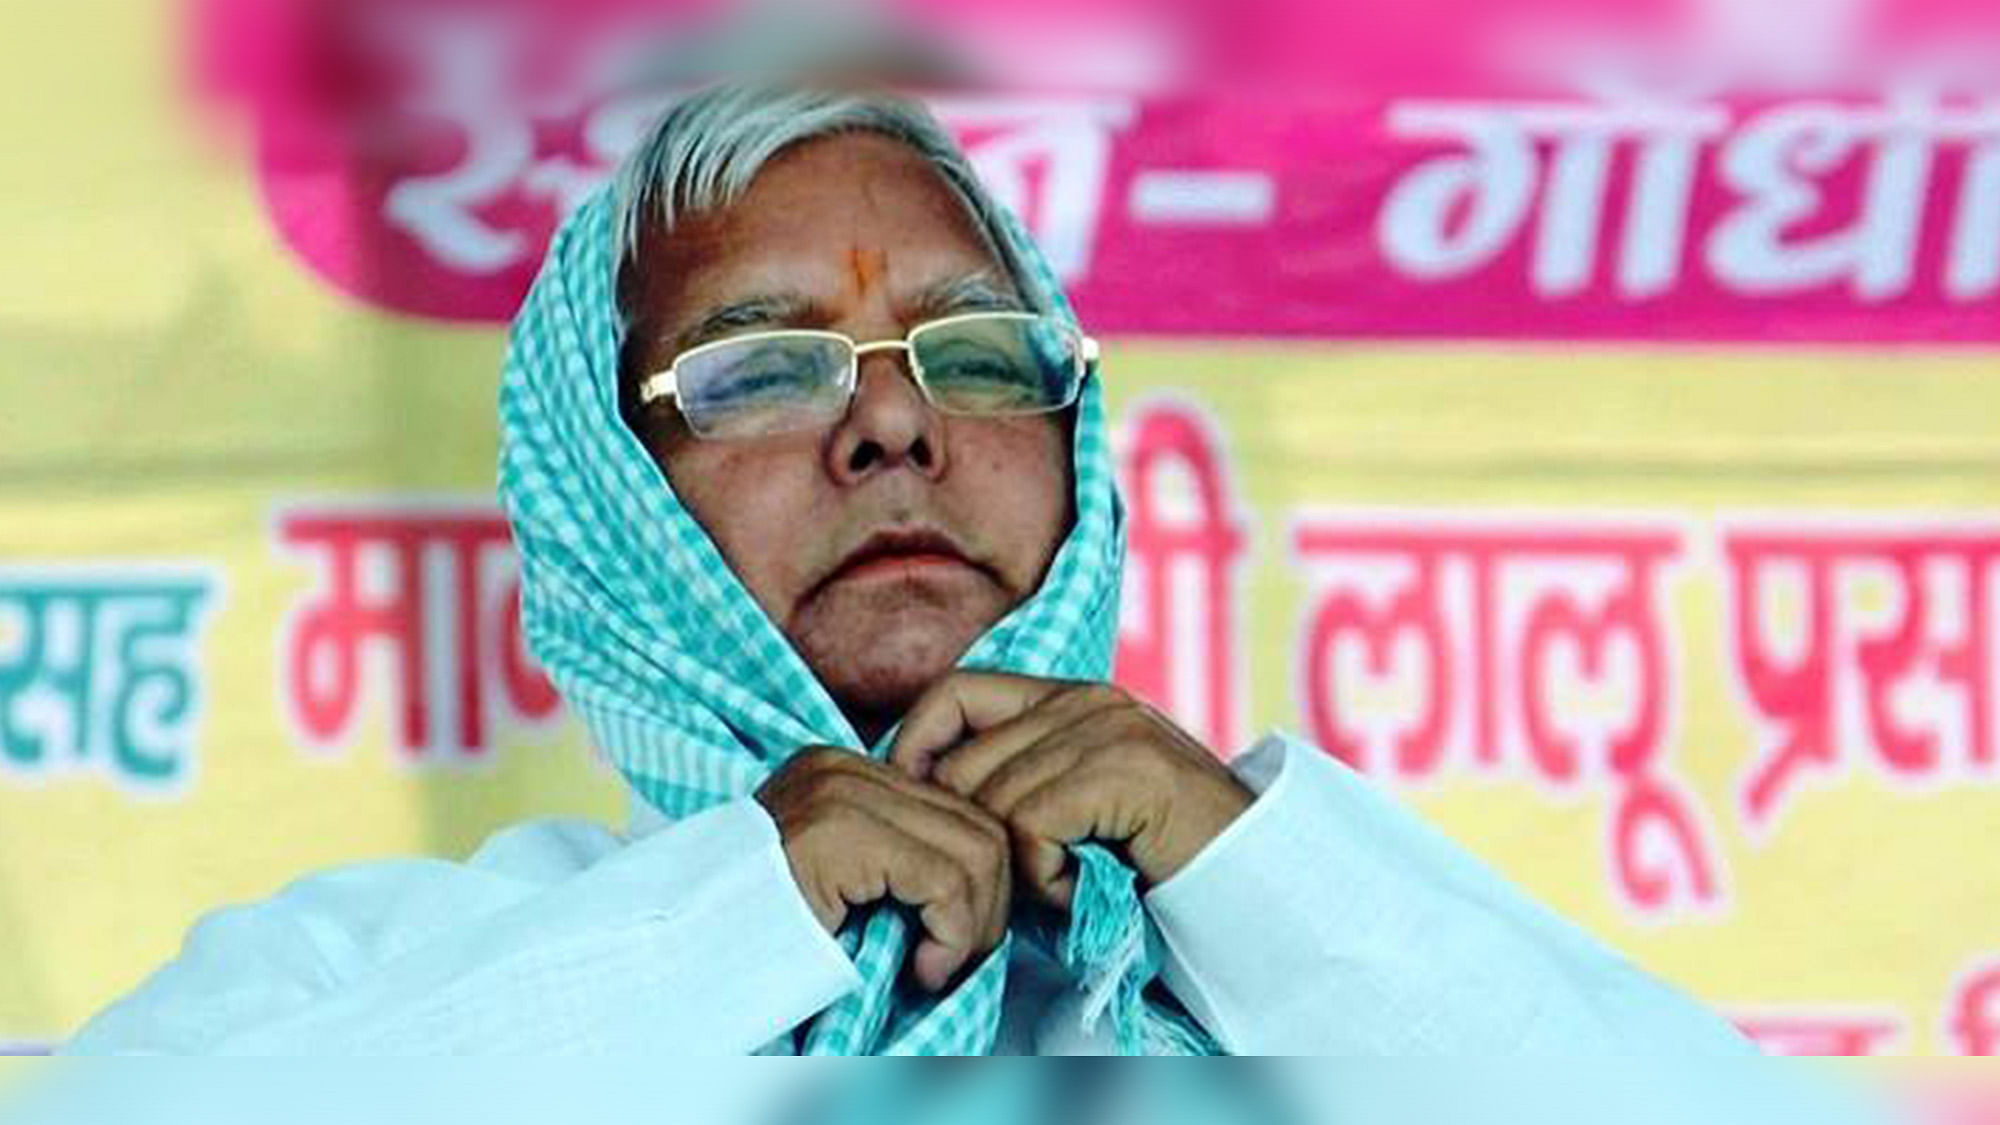 49 of 80 RJD MLAs have criminal cases against them. Lalu says there will be zero tolerance to corruption. (Photo: Facebook.com/laluprasadyadav) 